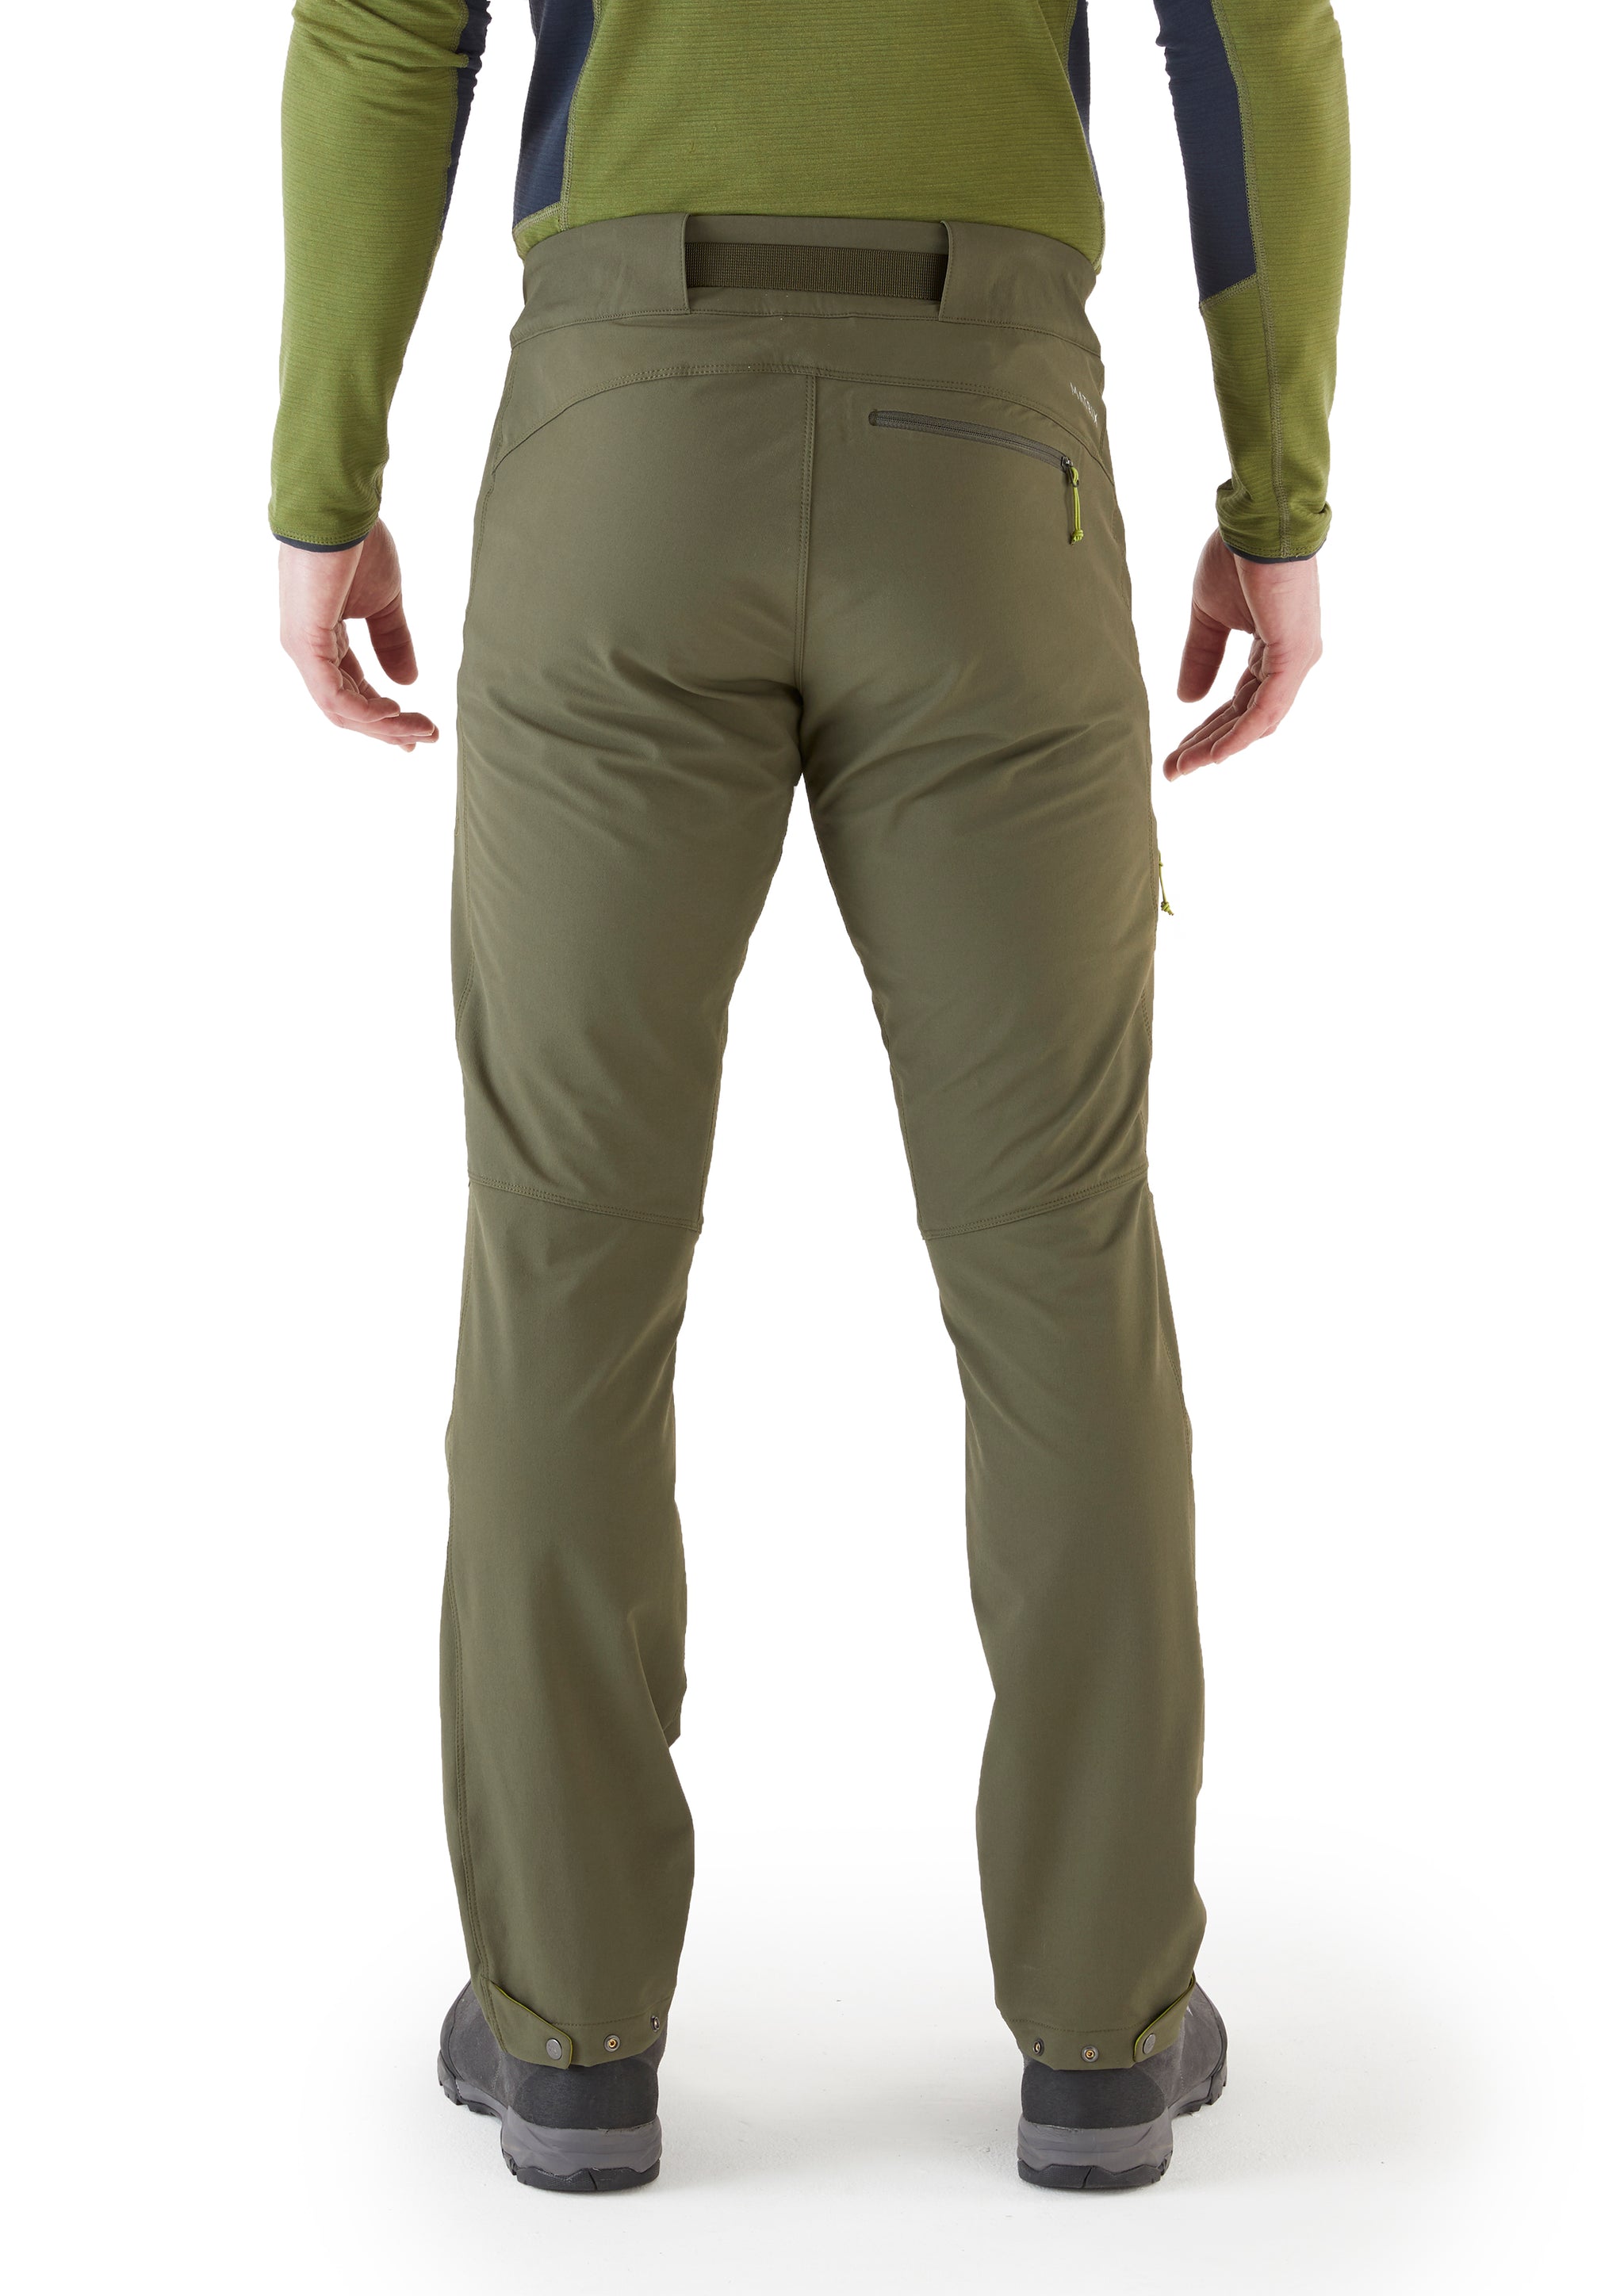 Rab Men's Incline AS Softshell Pants - Outfitters Store